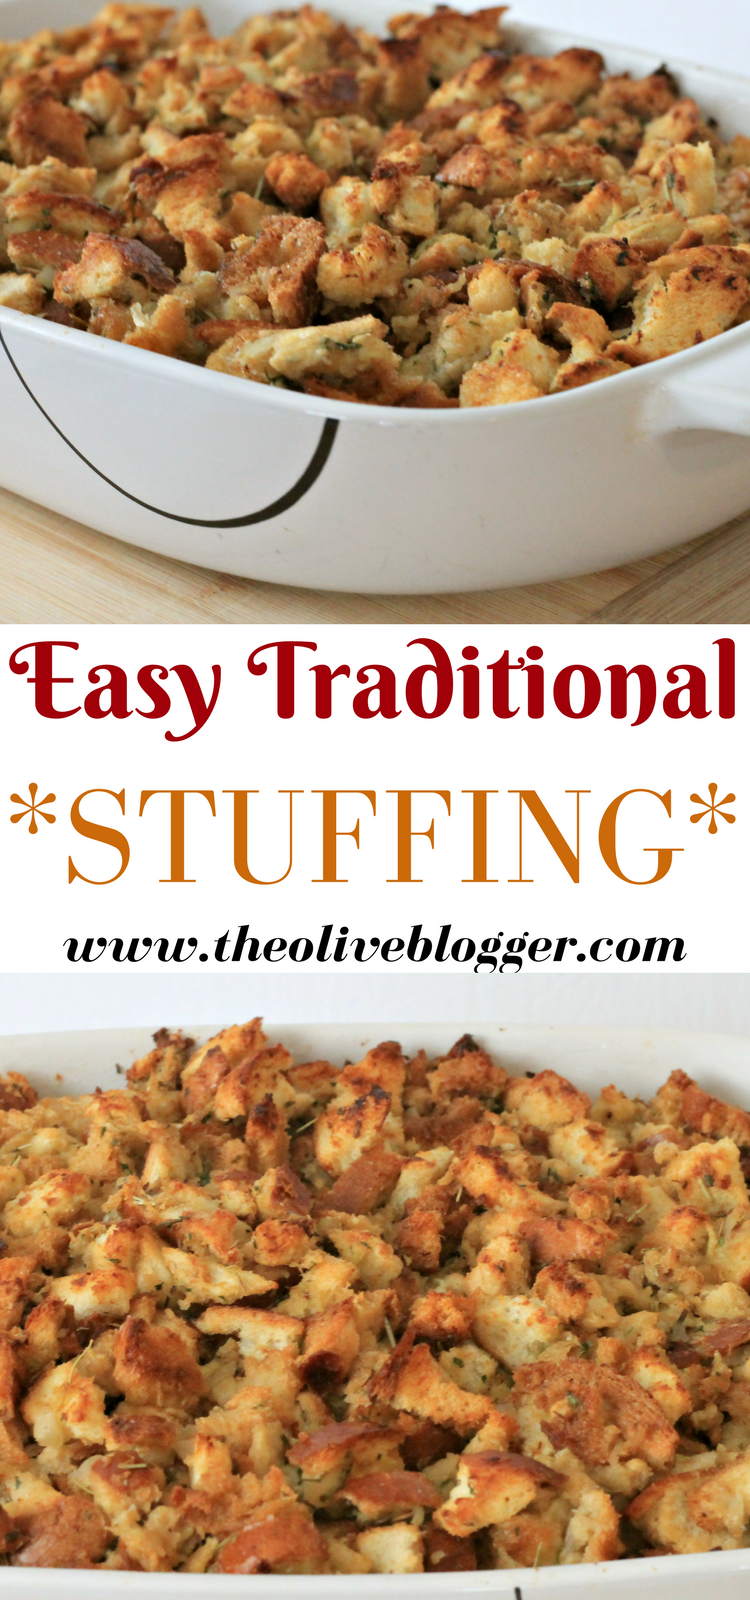 Easy Traditional Stuffing Recipe for the Holidays -   18 stuffing recipes thanksgiving easy ideas